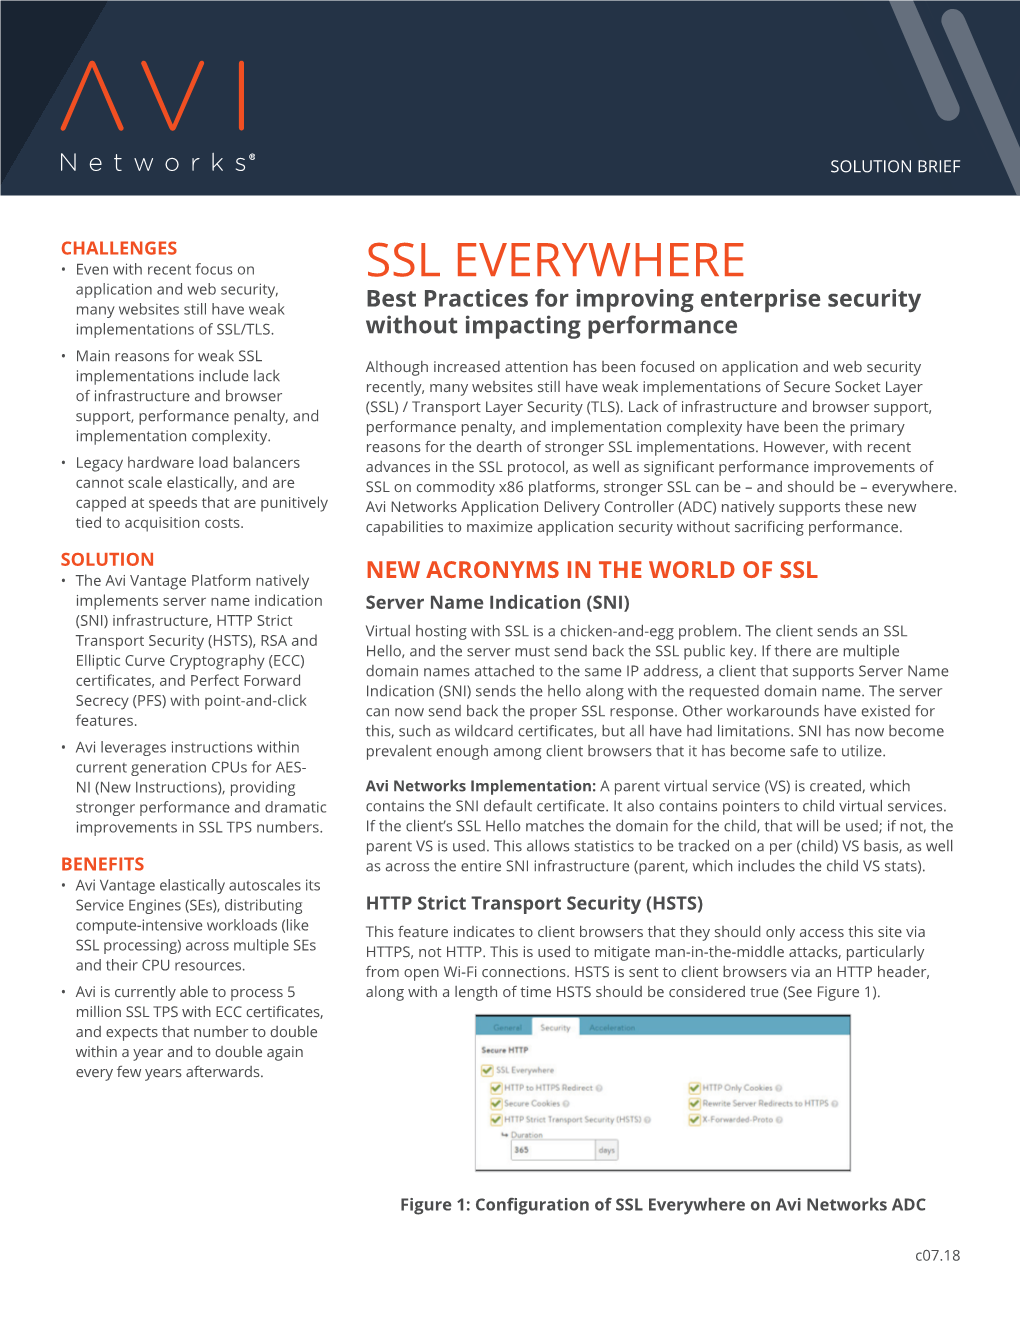 SSL EVERYWHERE Application and Web Security, Many Websites Still Have Weak Best Practices for Improving Enterprise Security Implementations of SSL/TLS